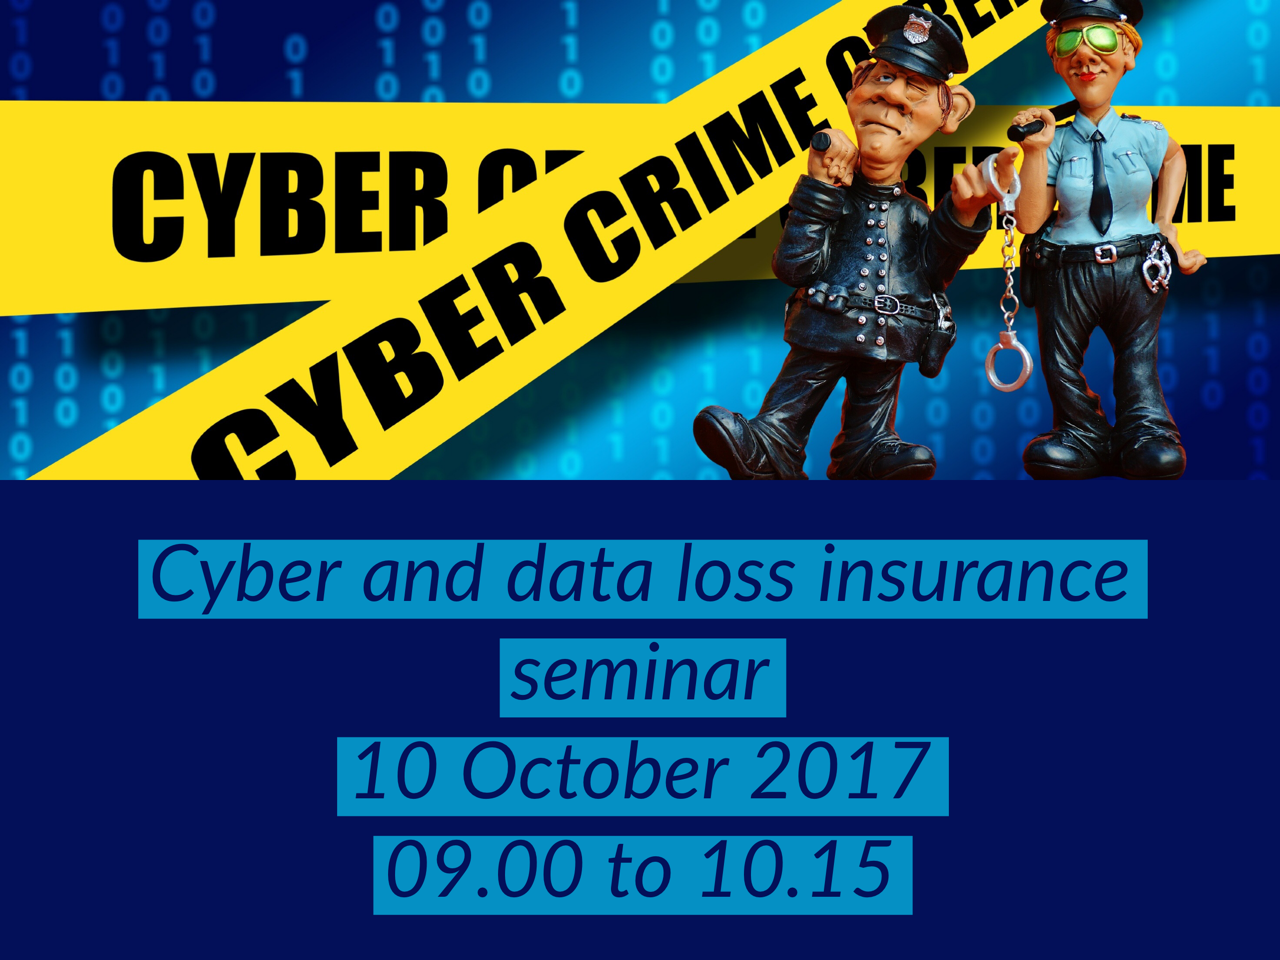 Mike Nicholls to chair Cyber and Data Loss Insurance Seminar Image